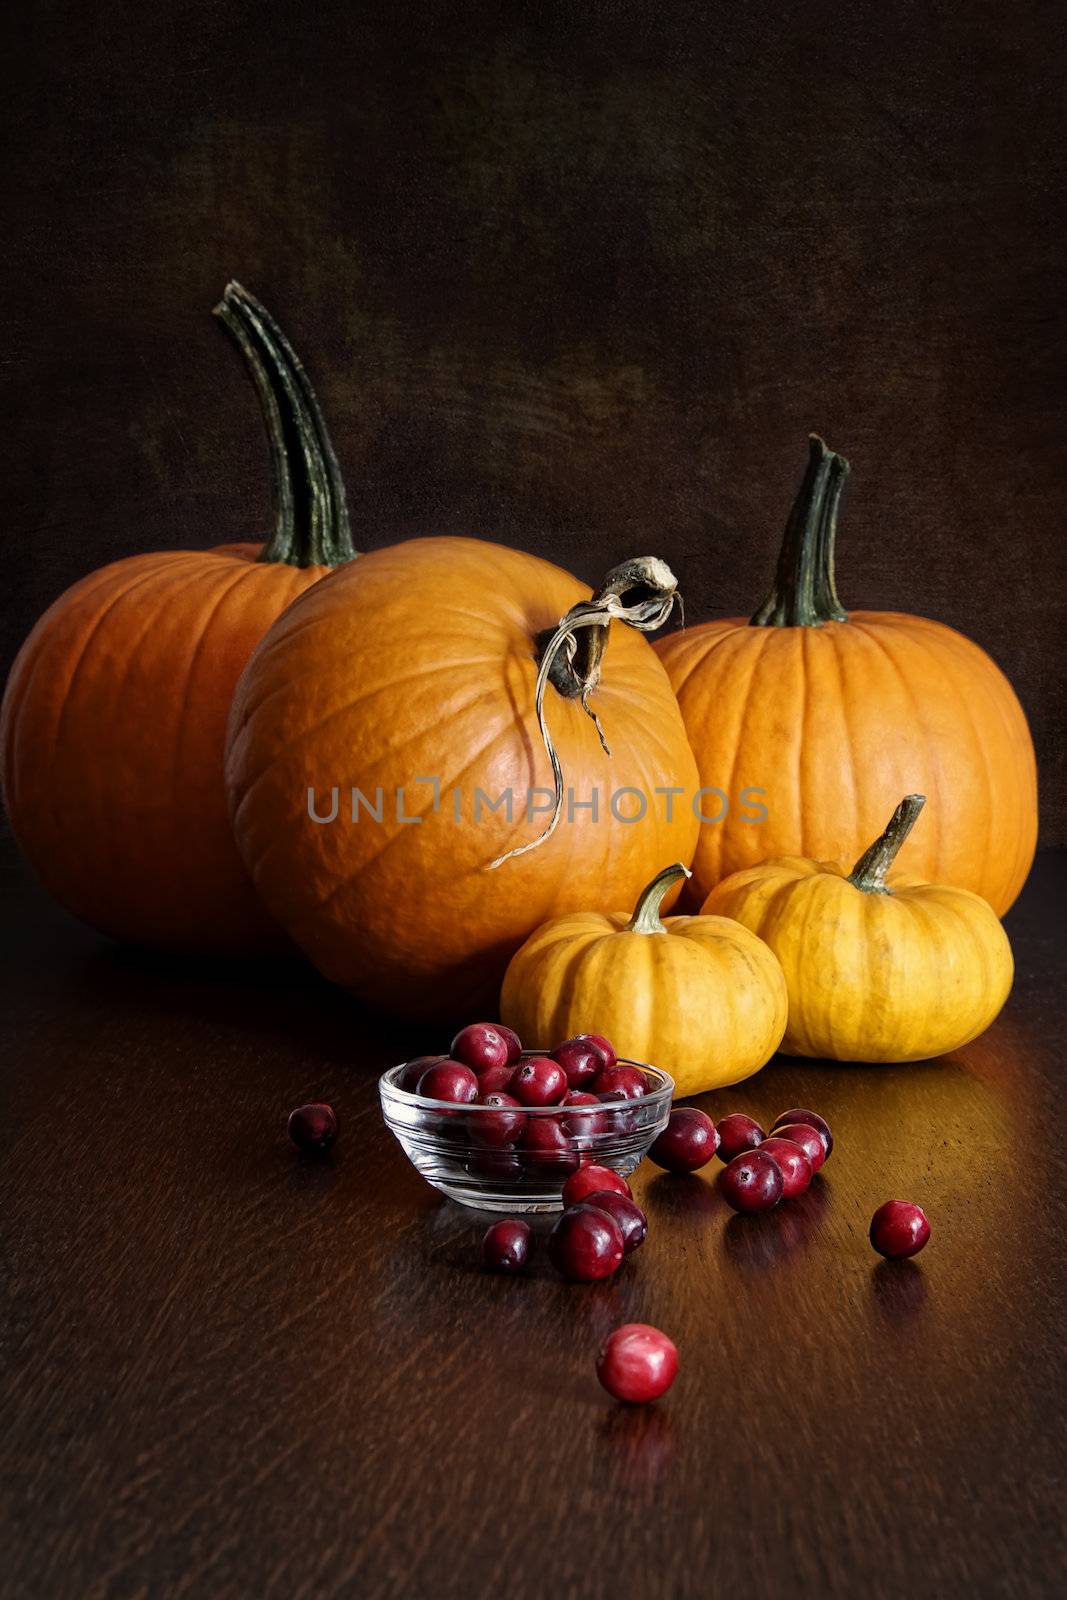 Pumpkins, gourds and cranberries on table